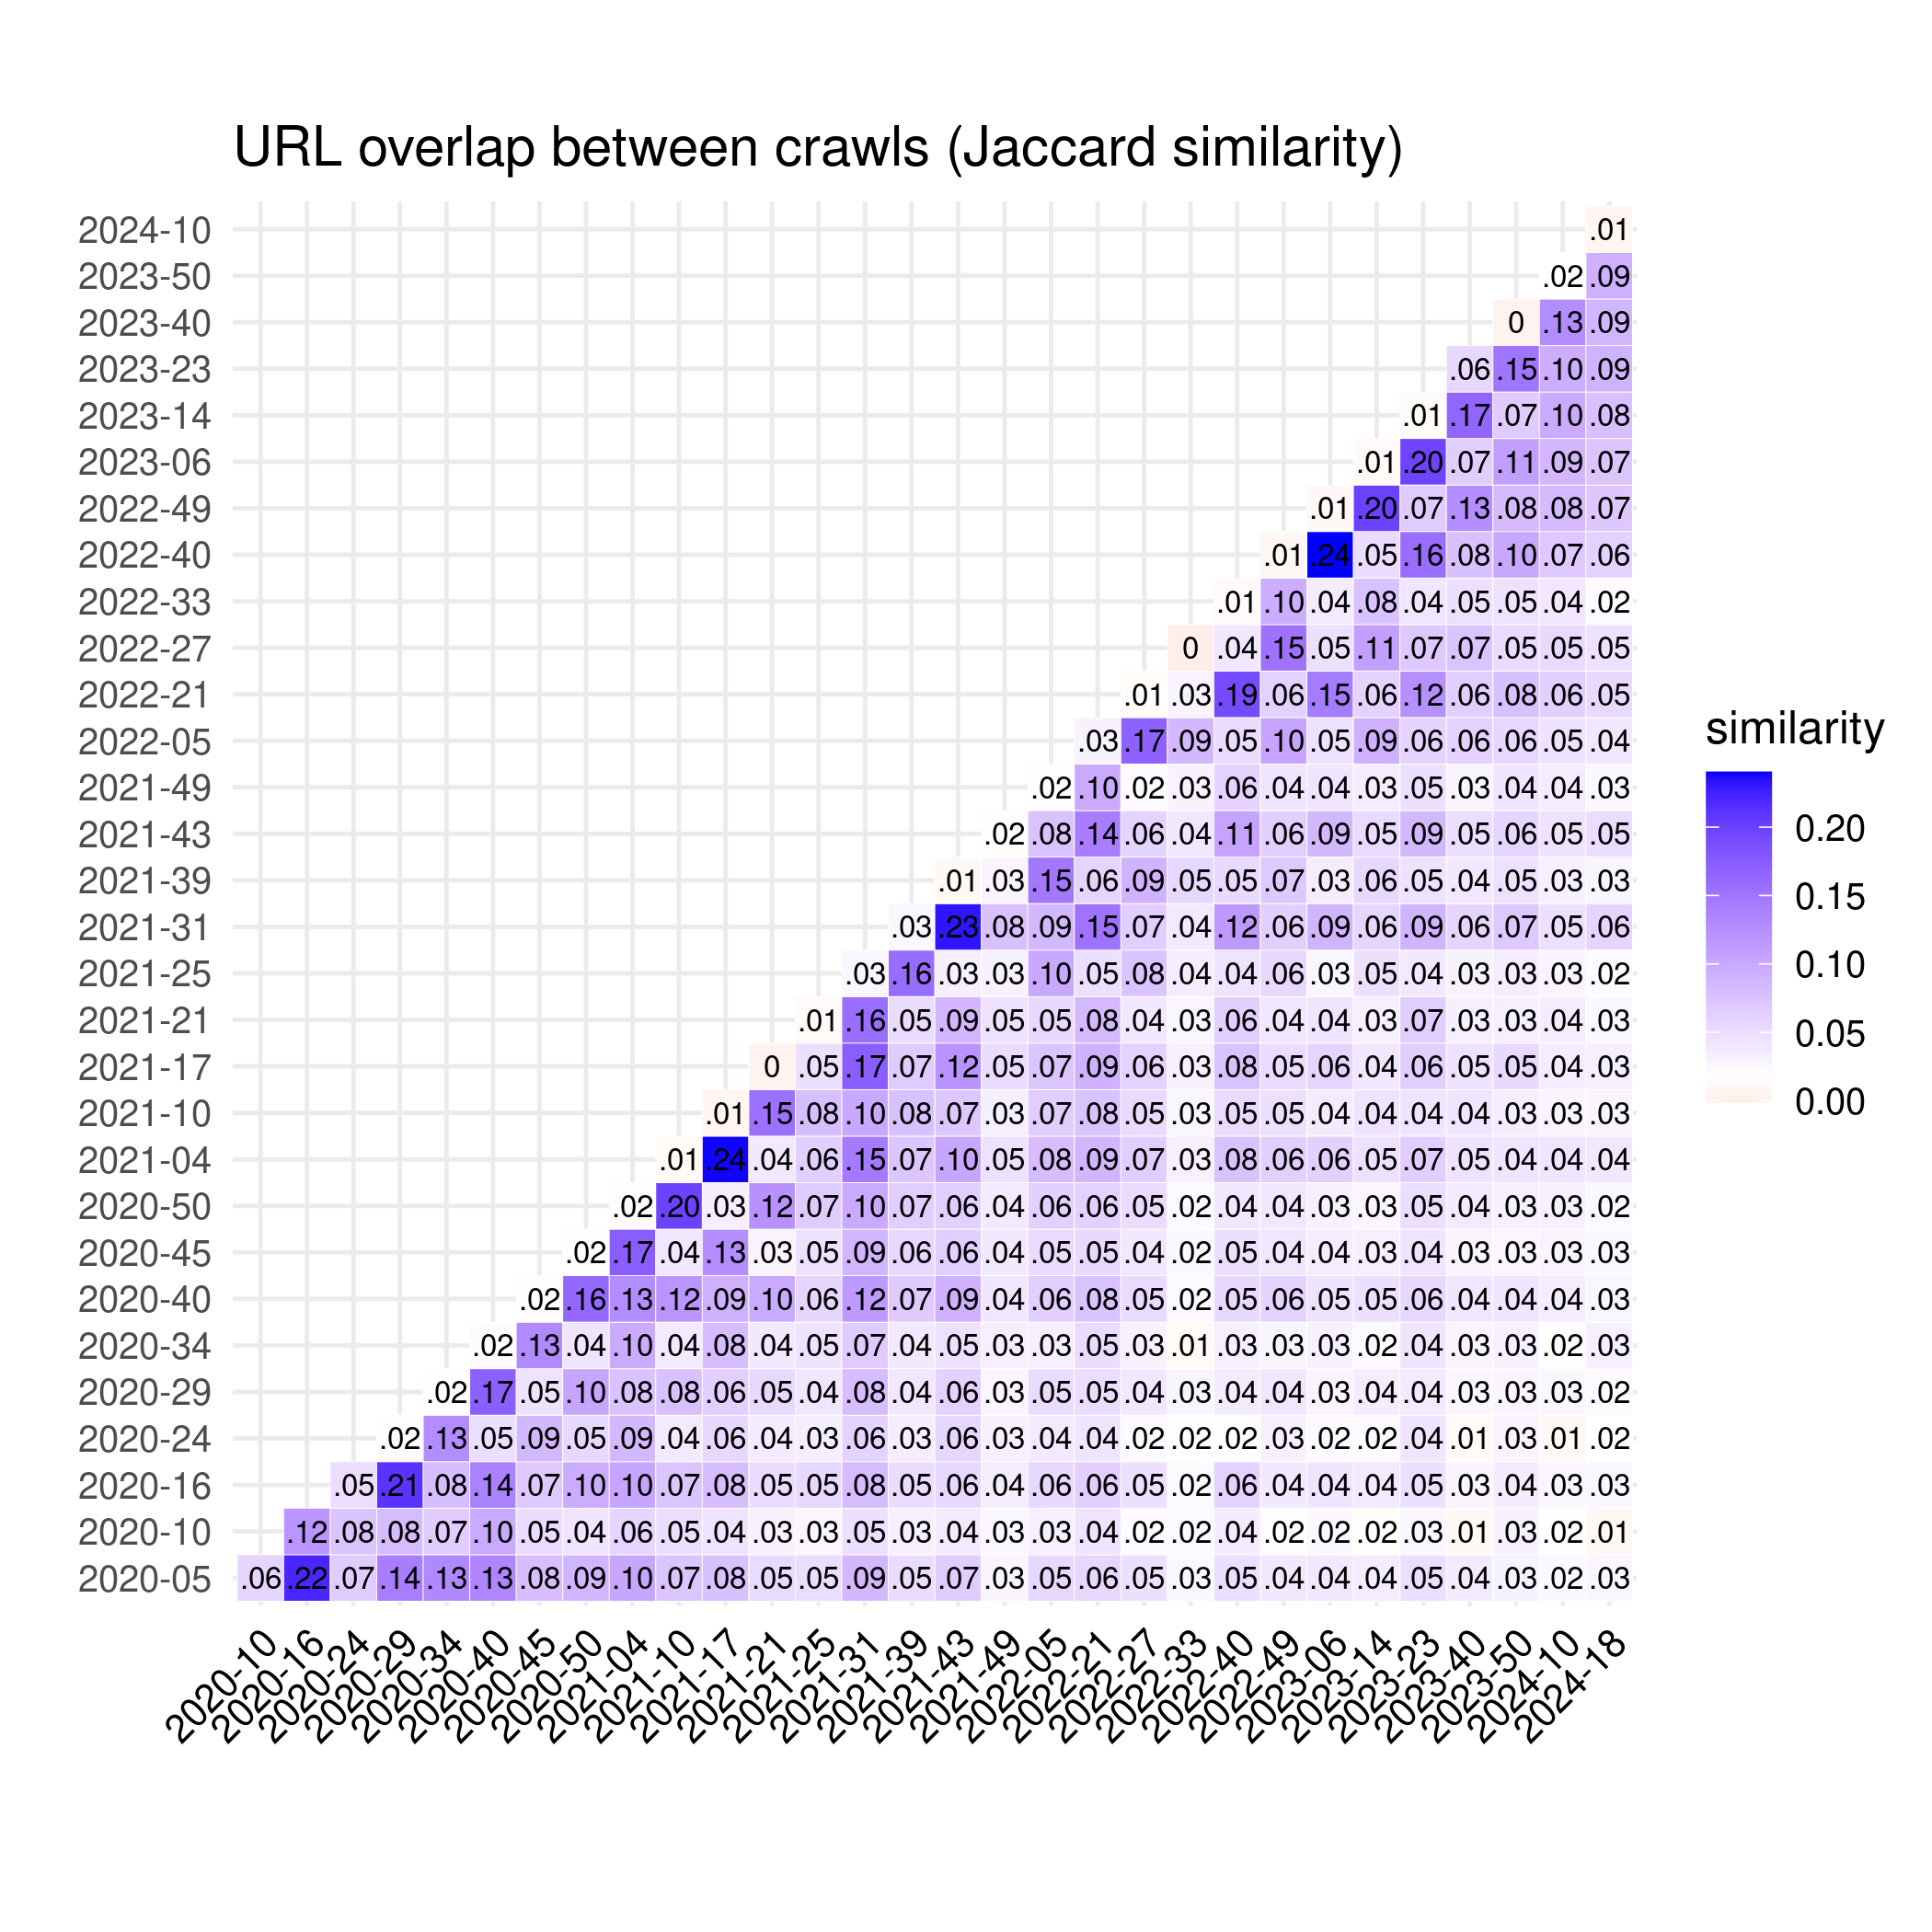 URL overlap (Jaccard similarity) between Common Crawl monthly crawls